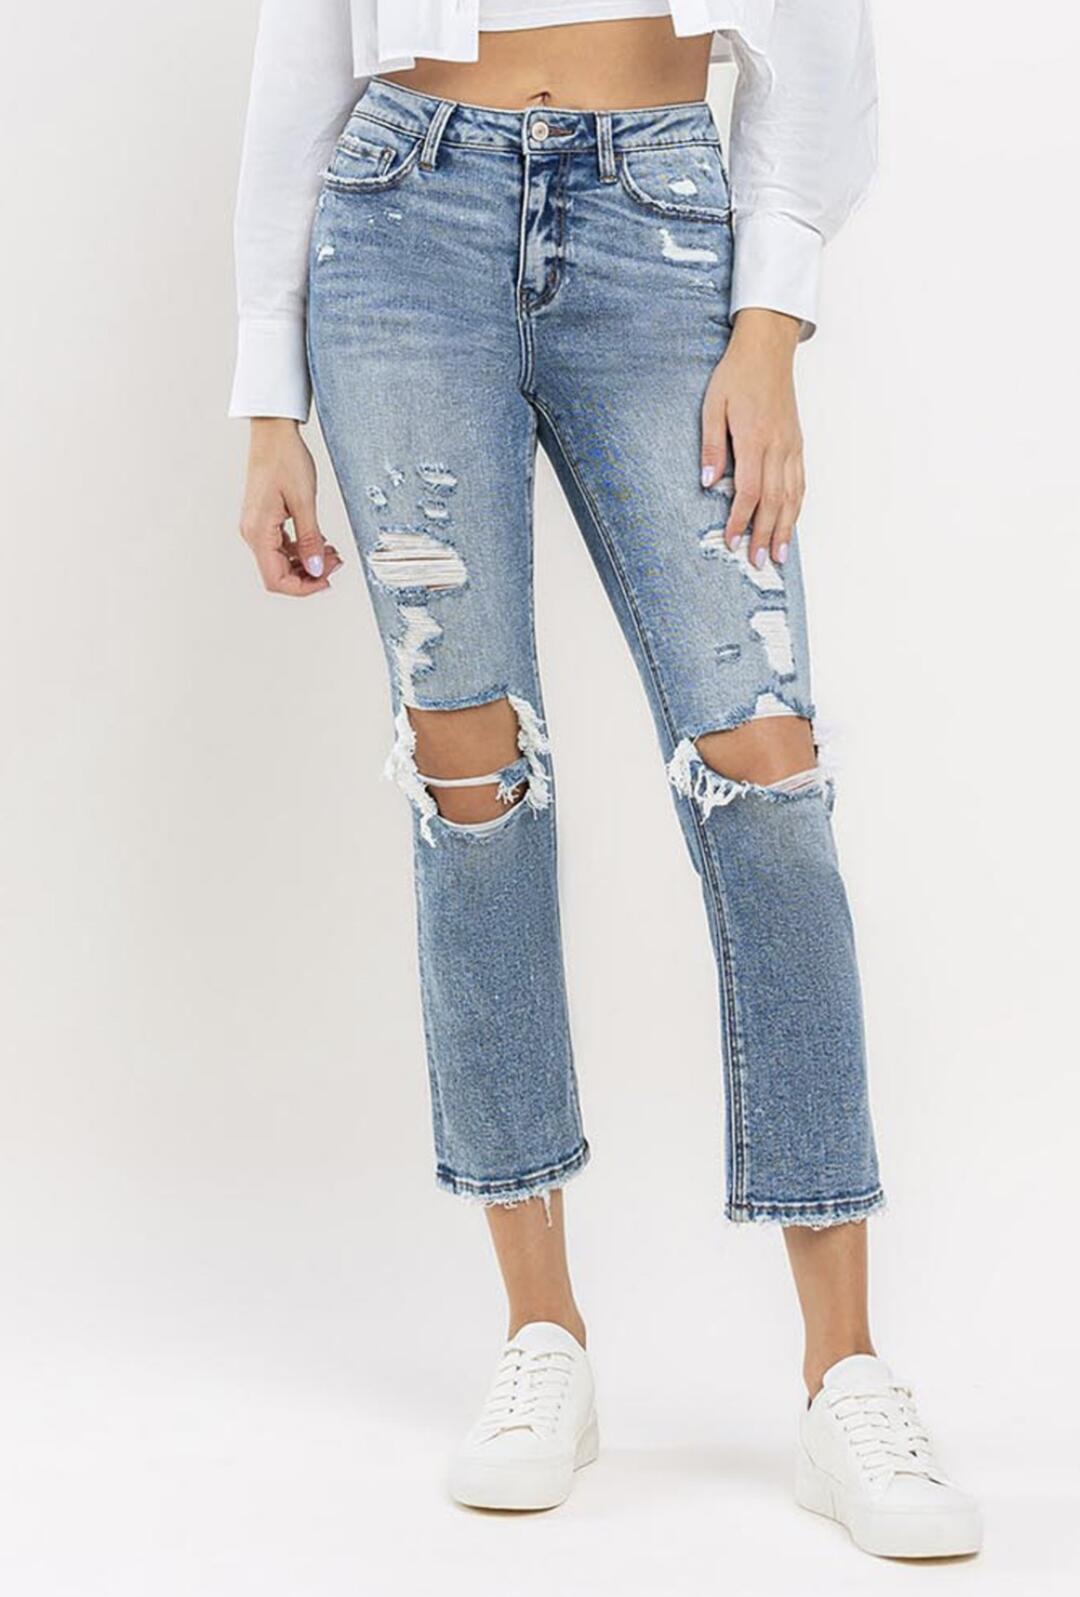 Lover Jeans #S401